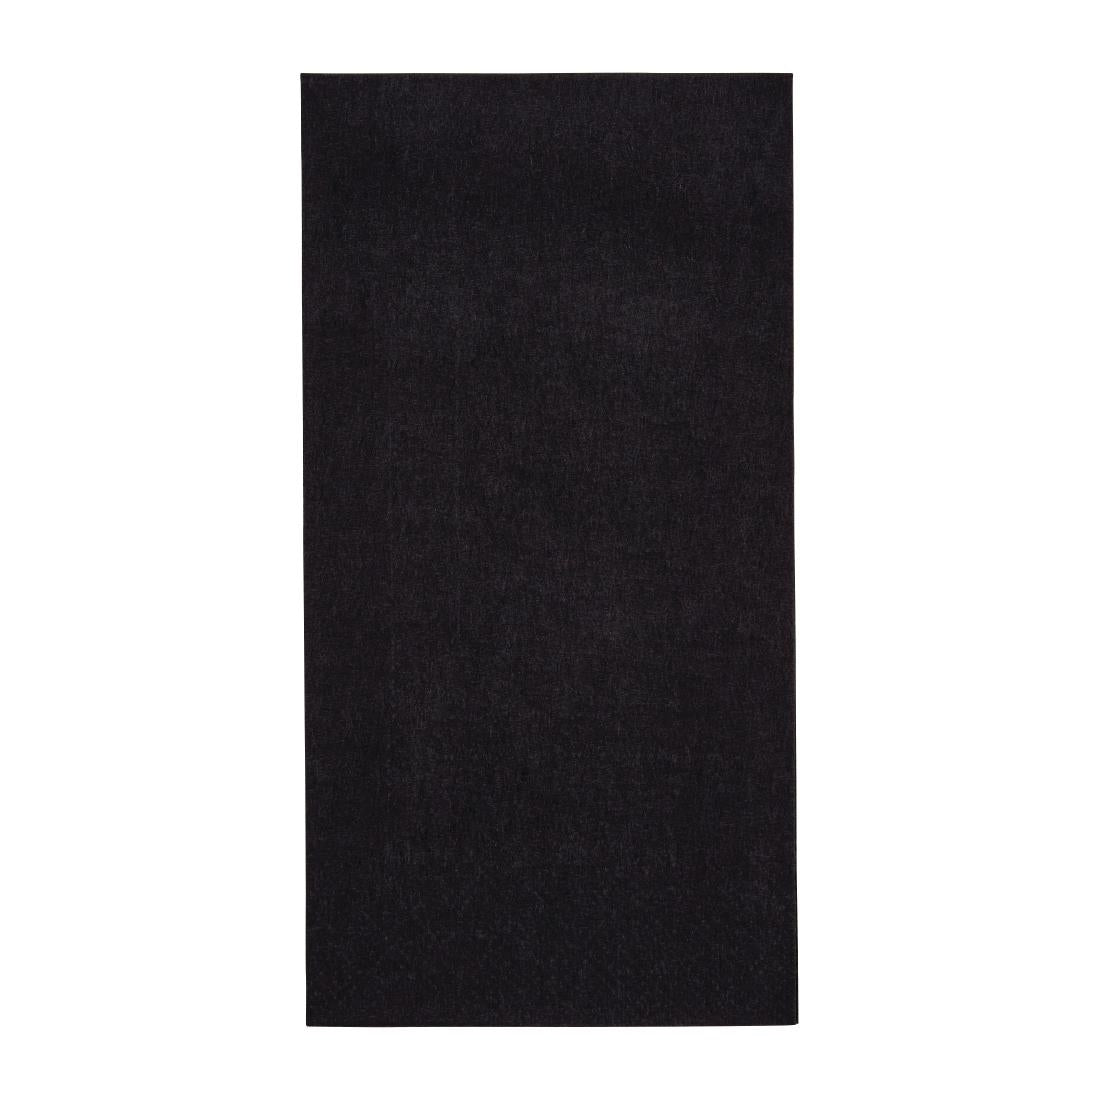 FE261 Fiesta Recyclable Dinner Napkin Black 40x40cm 3ply 1/8 Fold (Pack of 1000) JD Catering Equipment Solutions Ltd